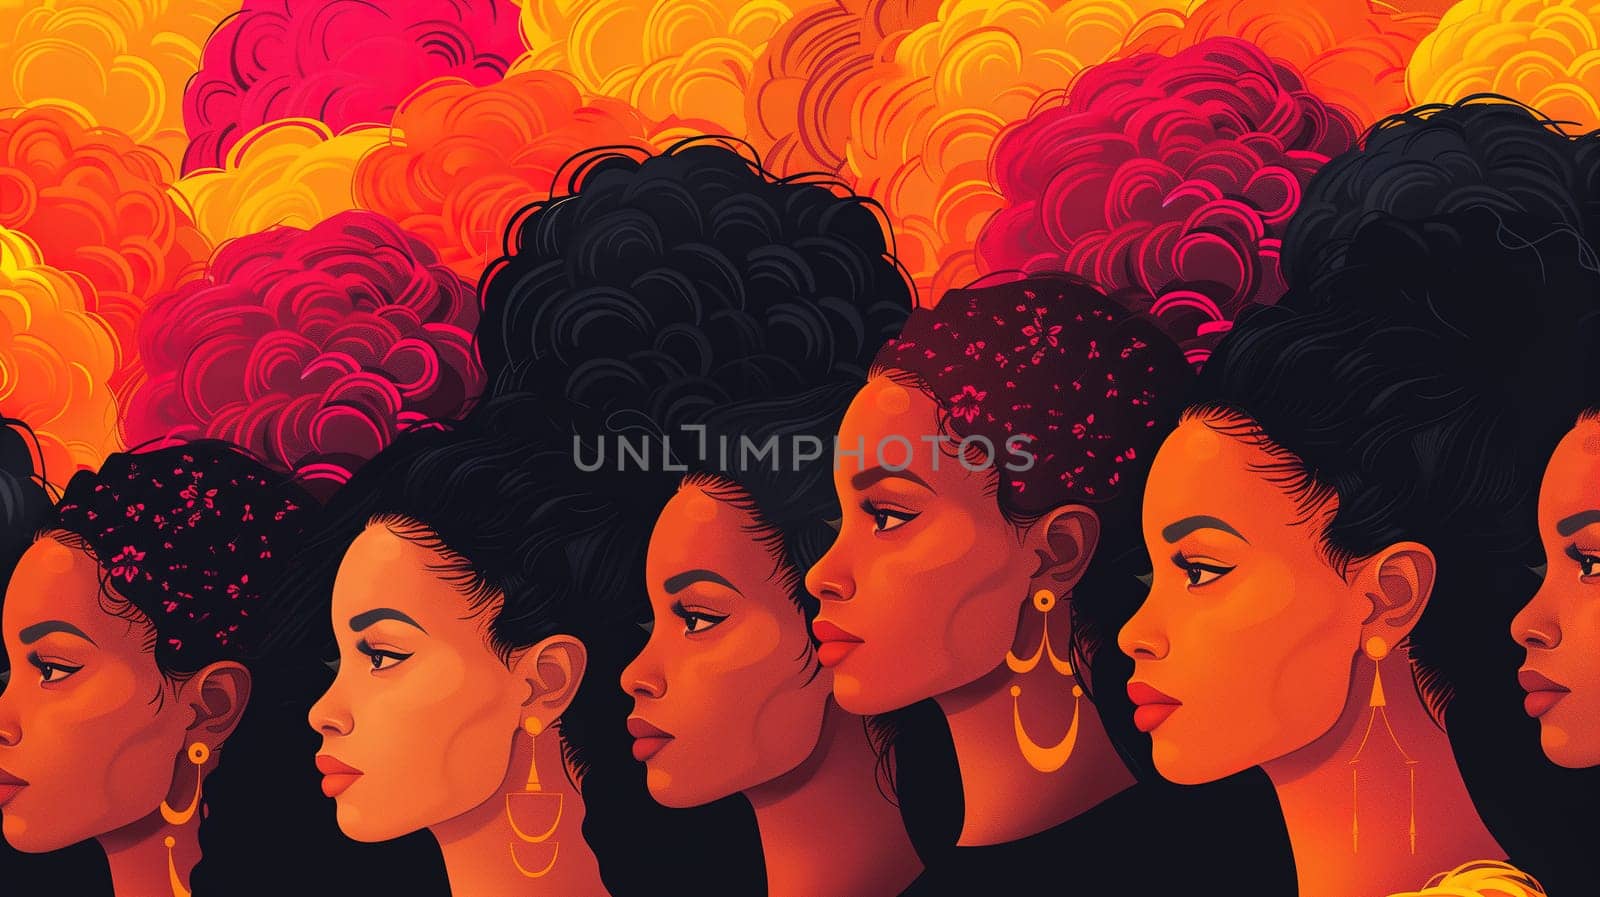 A Painting of a Group of Black Women by TRMK